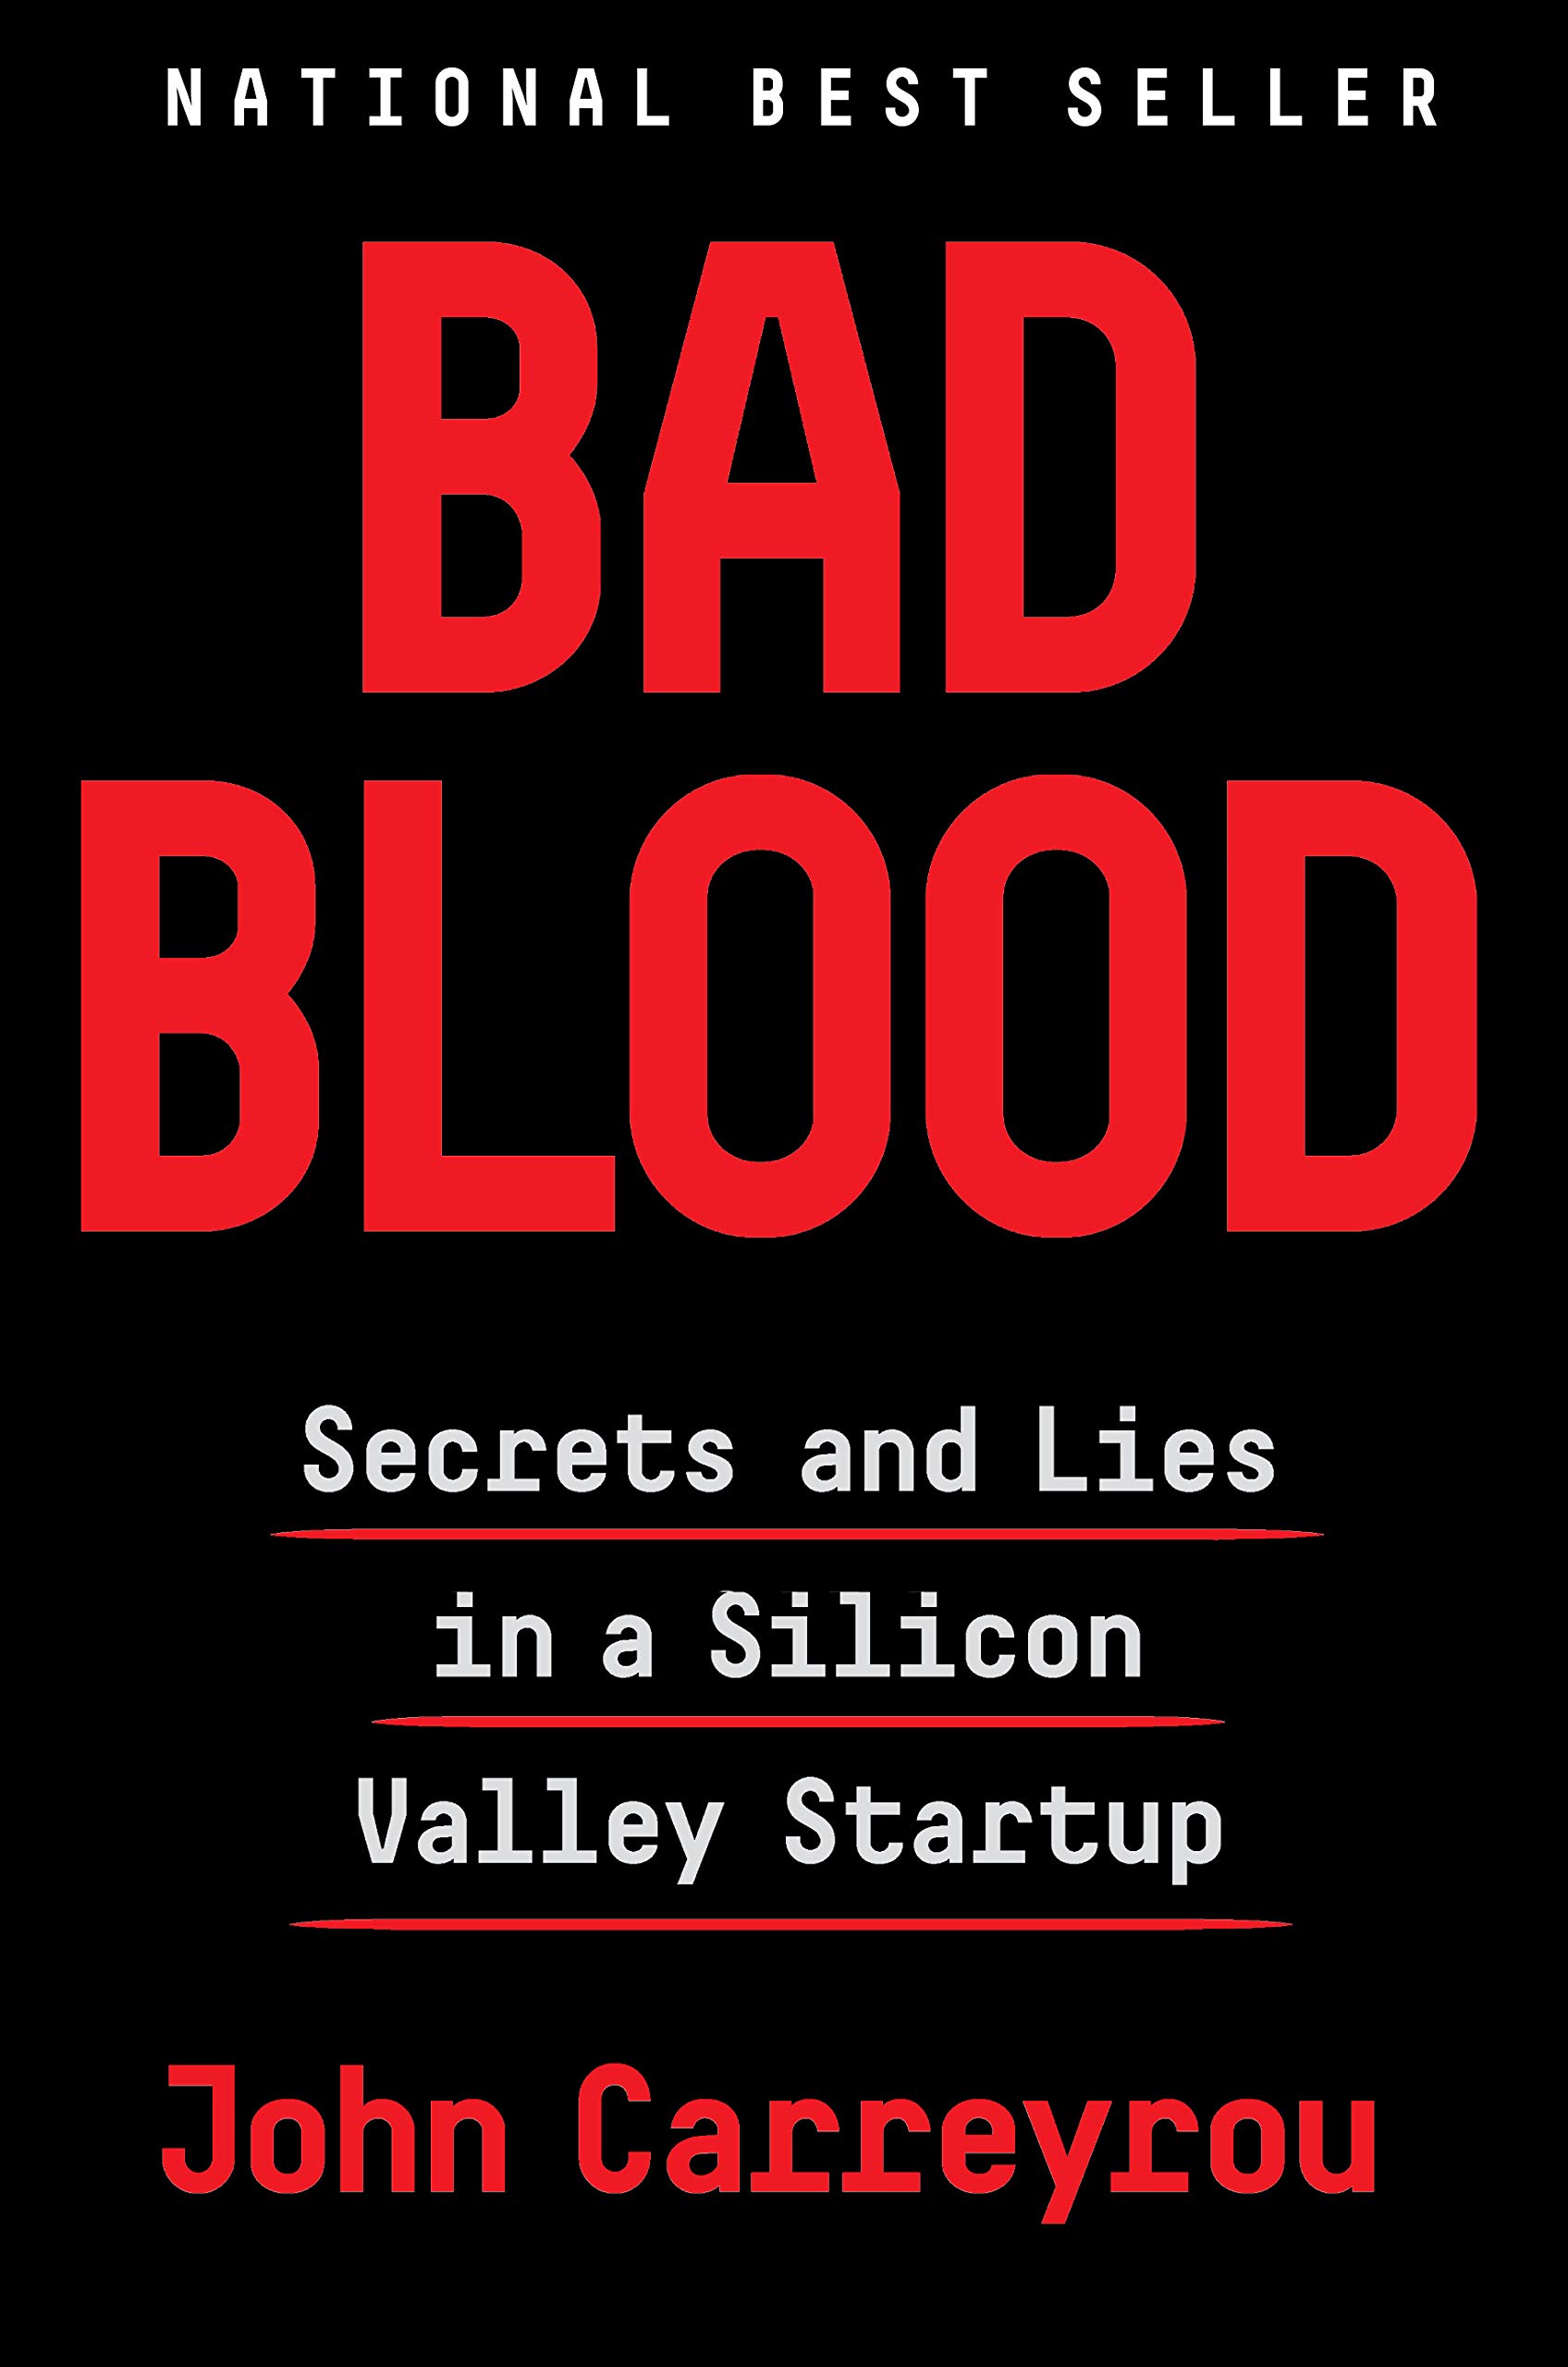 Bad blood : secrets and lies in a Silicon Valley startup 책표지